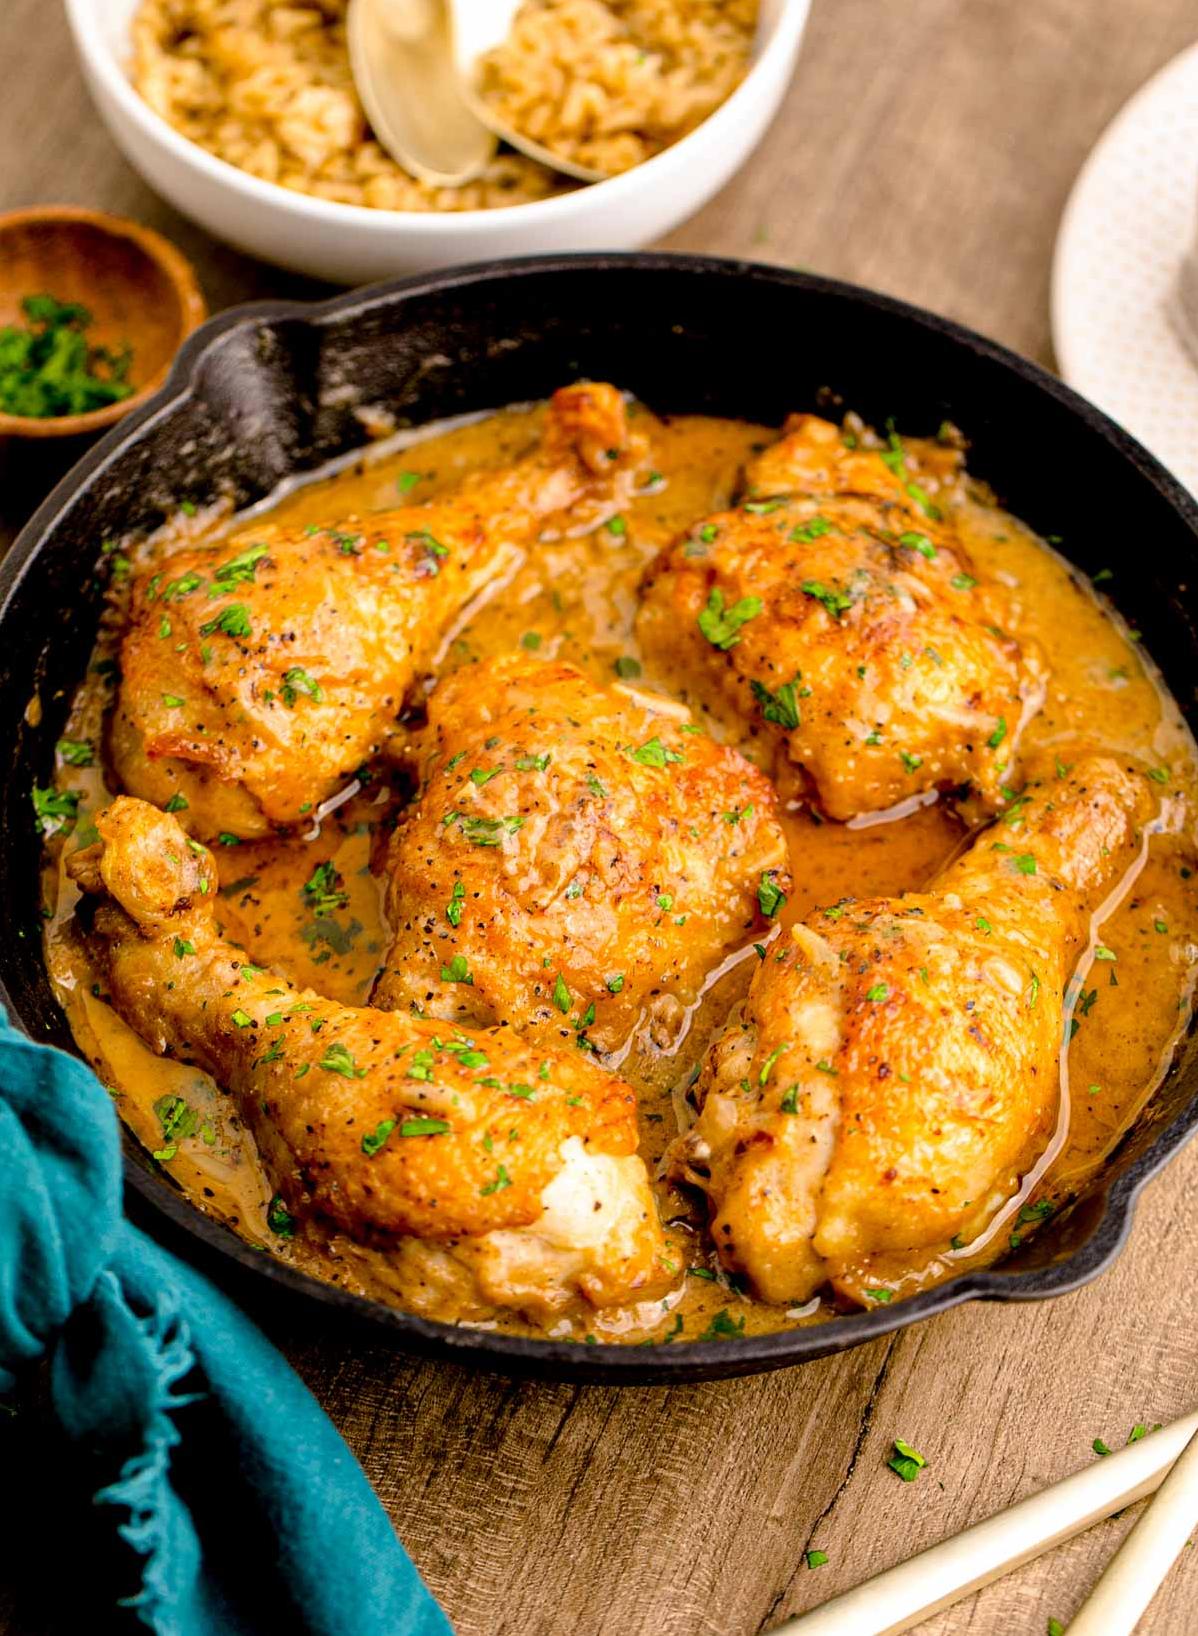  Perfectly crispy fried chicken smothered in a savory gravy